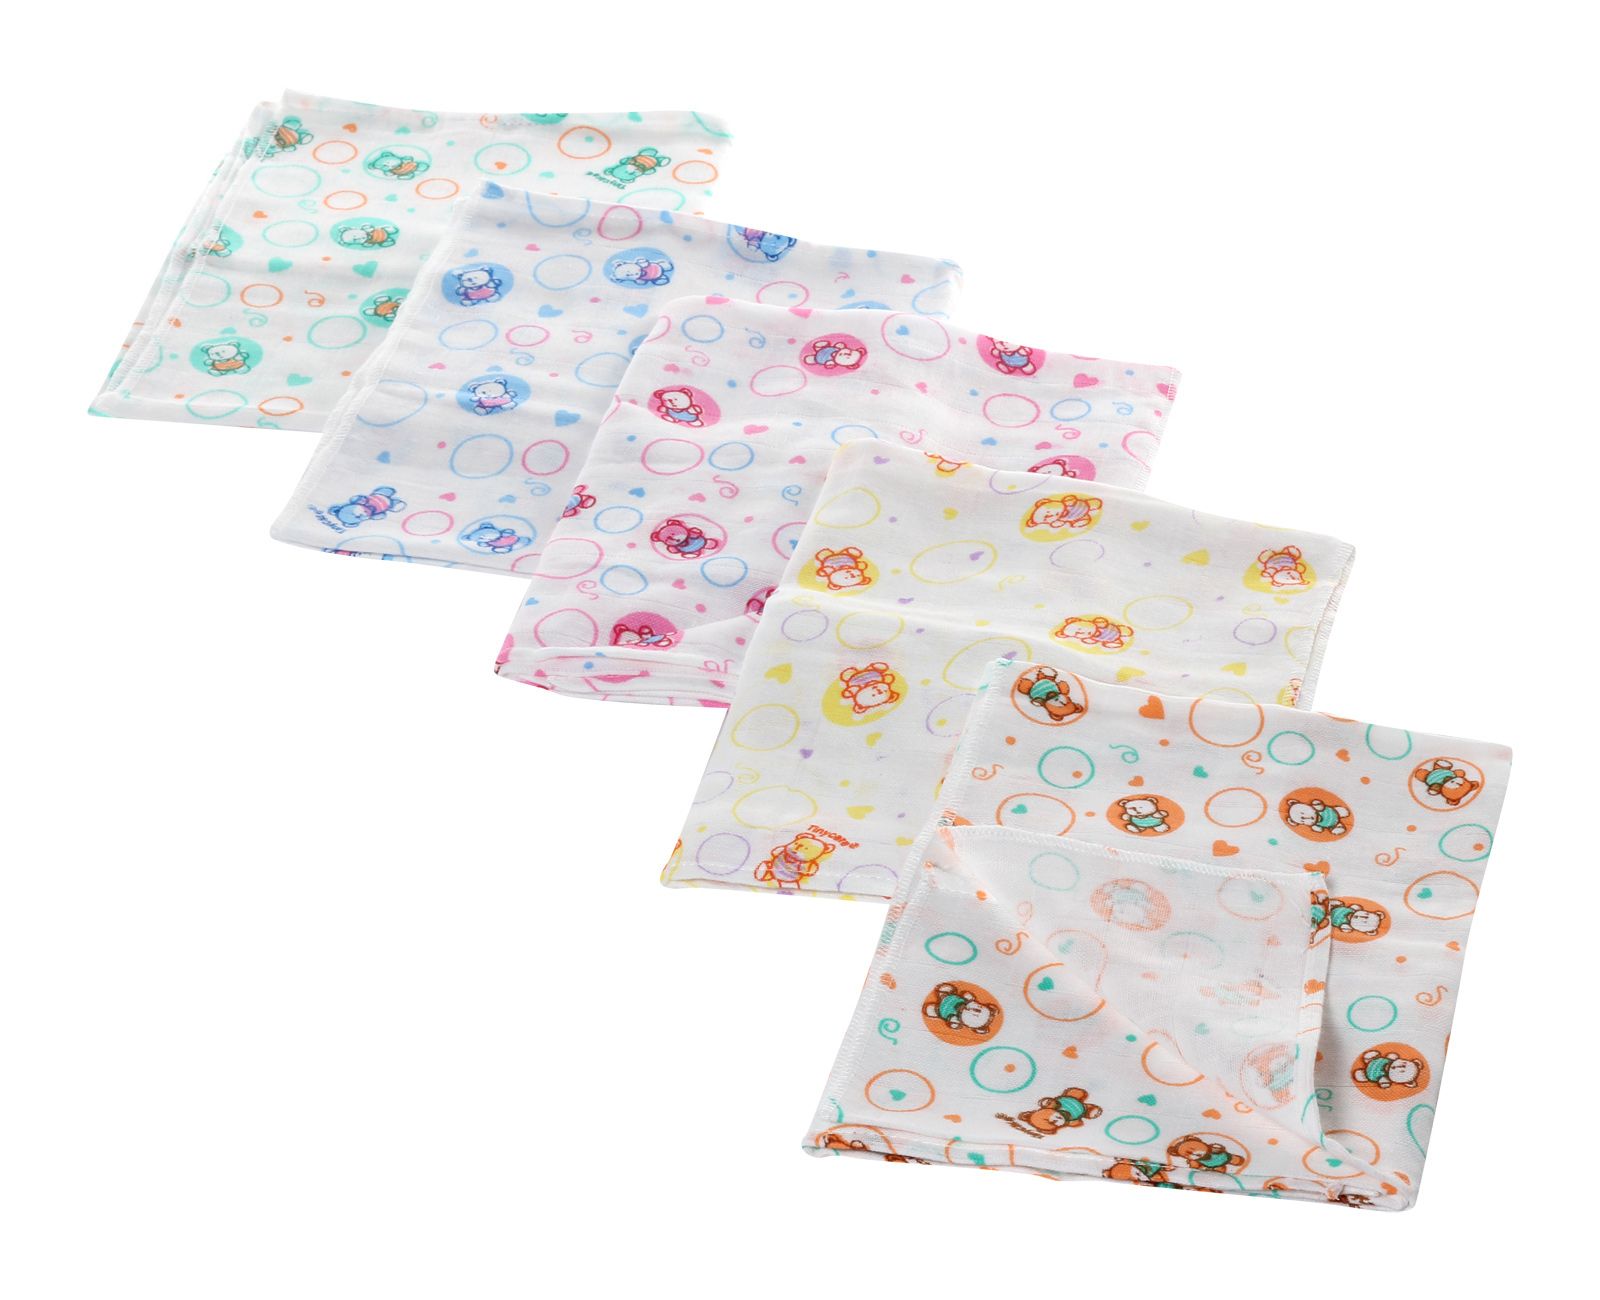 Tinycare - Square Printed Nappies